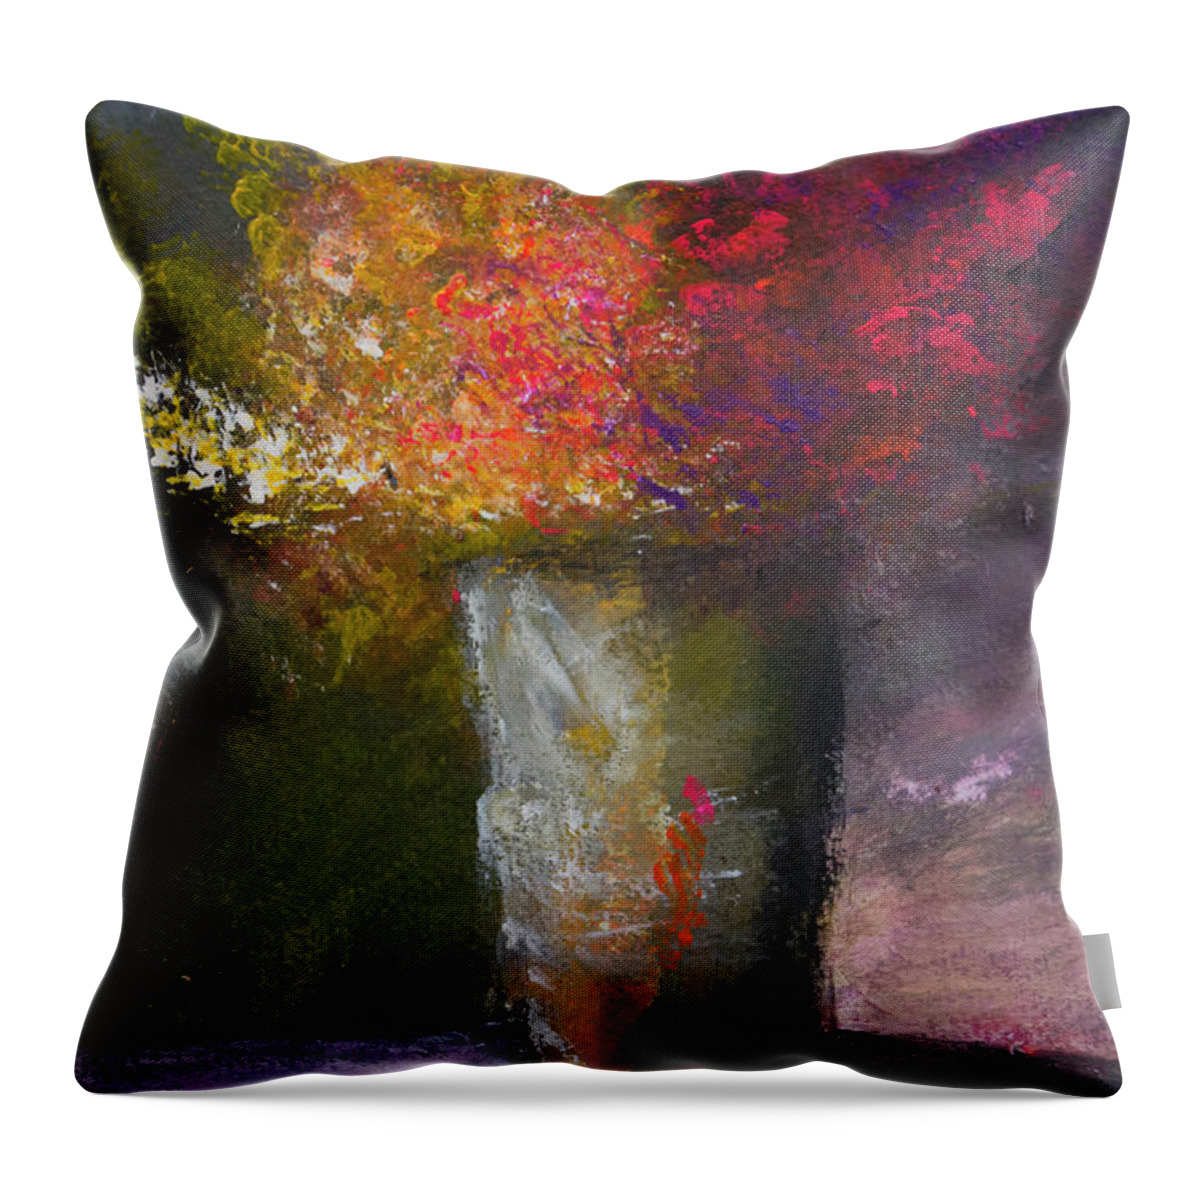 Flowers Throw Pillow featuring the painting A Gift by Linda Bailey